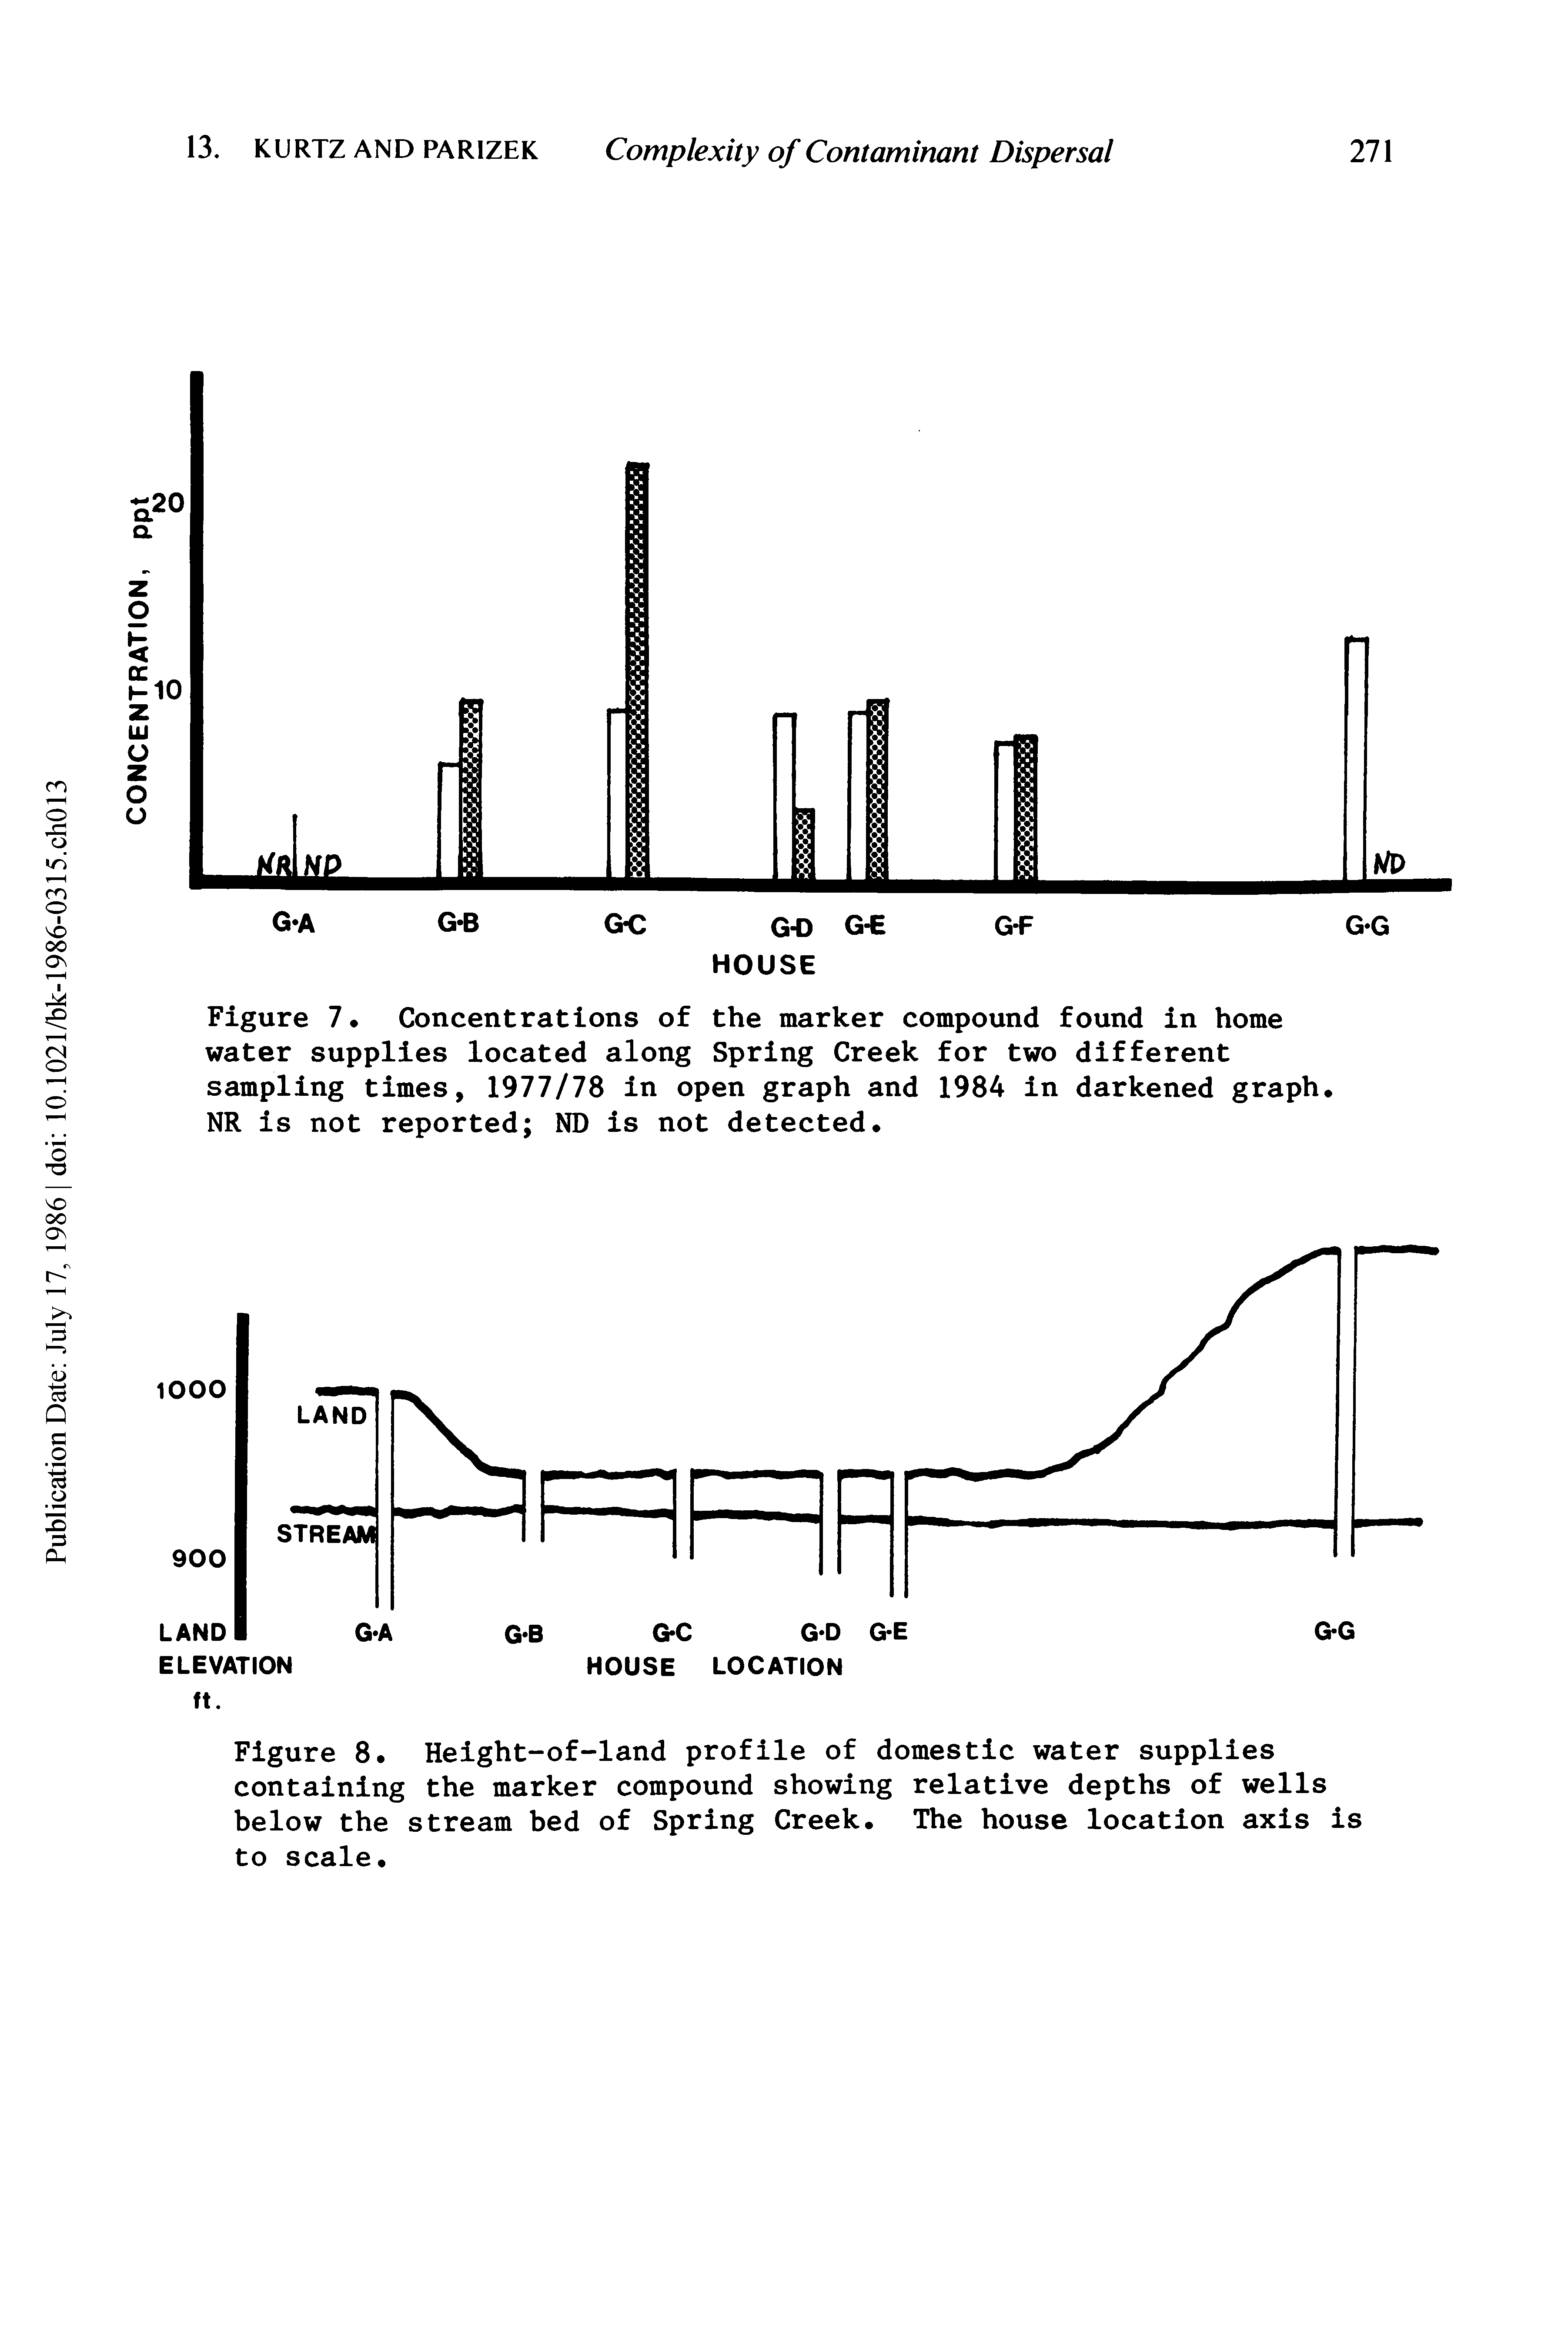 Figure 7. Concentrations of the marker compound found in home water supplies located along Spring Creek for two different sampling times, 1977/78 in open graph and 1984 in darkened graph. NR is not reported ND is not detected.